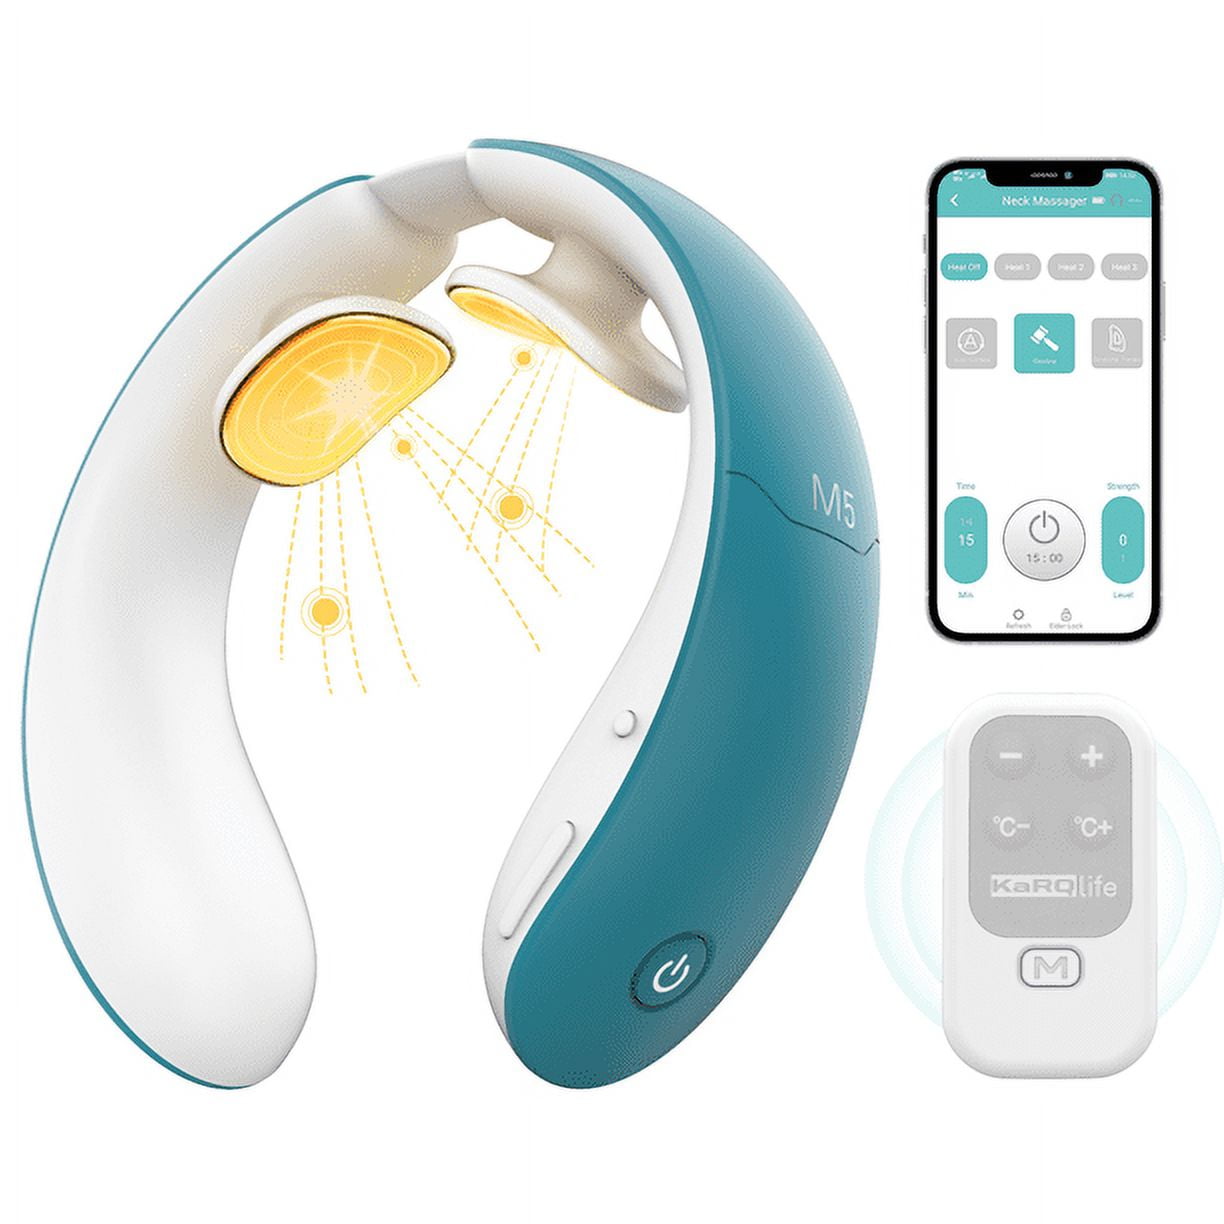 Soothely Neck Massager, Soothely Neck Massager with Heat, Portable Neck  Massager for Neck Pain, Electric Neck Pain Relief Massager for Women Men  (White) : : Health & Personal Care